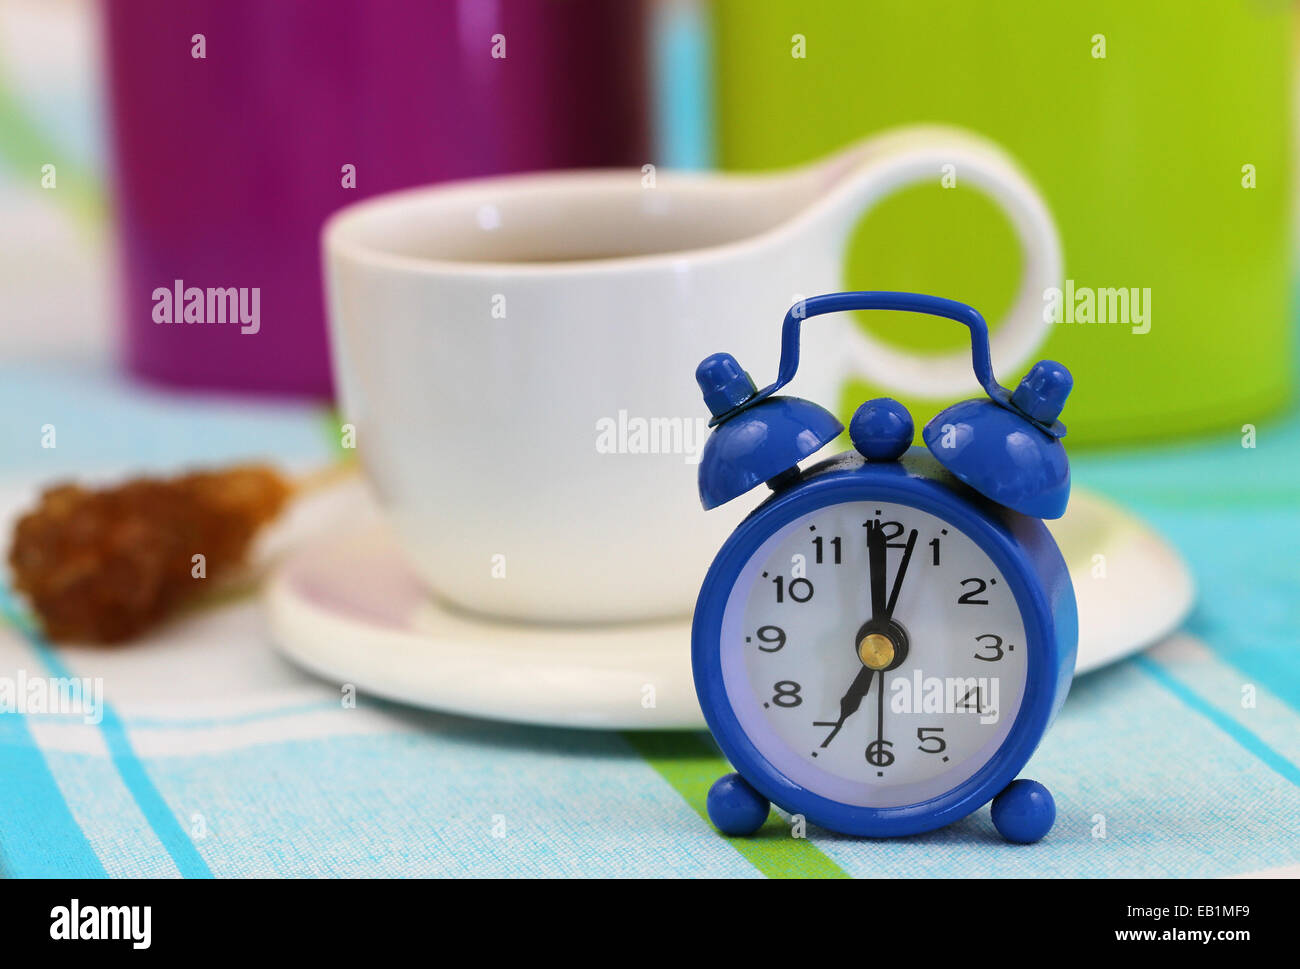 Miniature clock showing 7 and cup of coffee Stock Photo